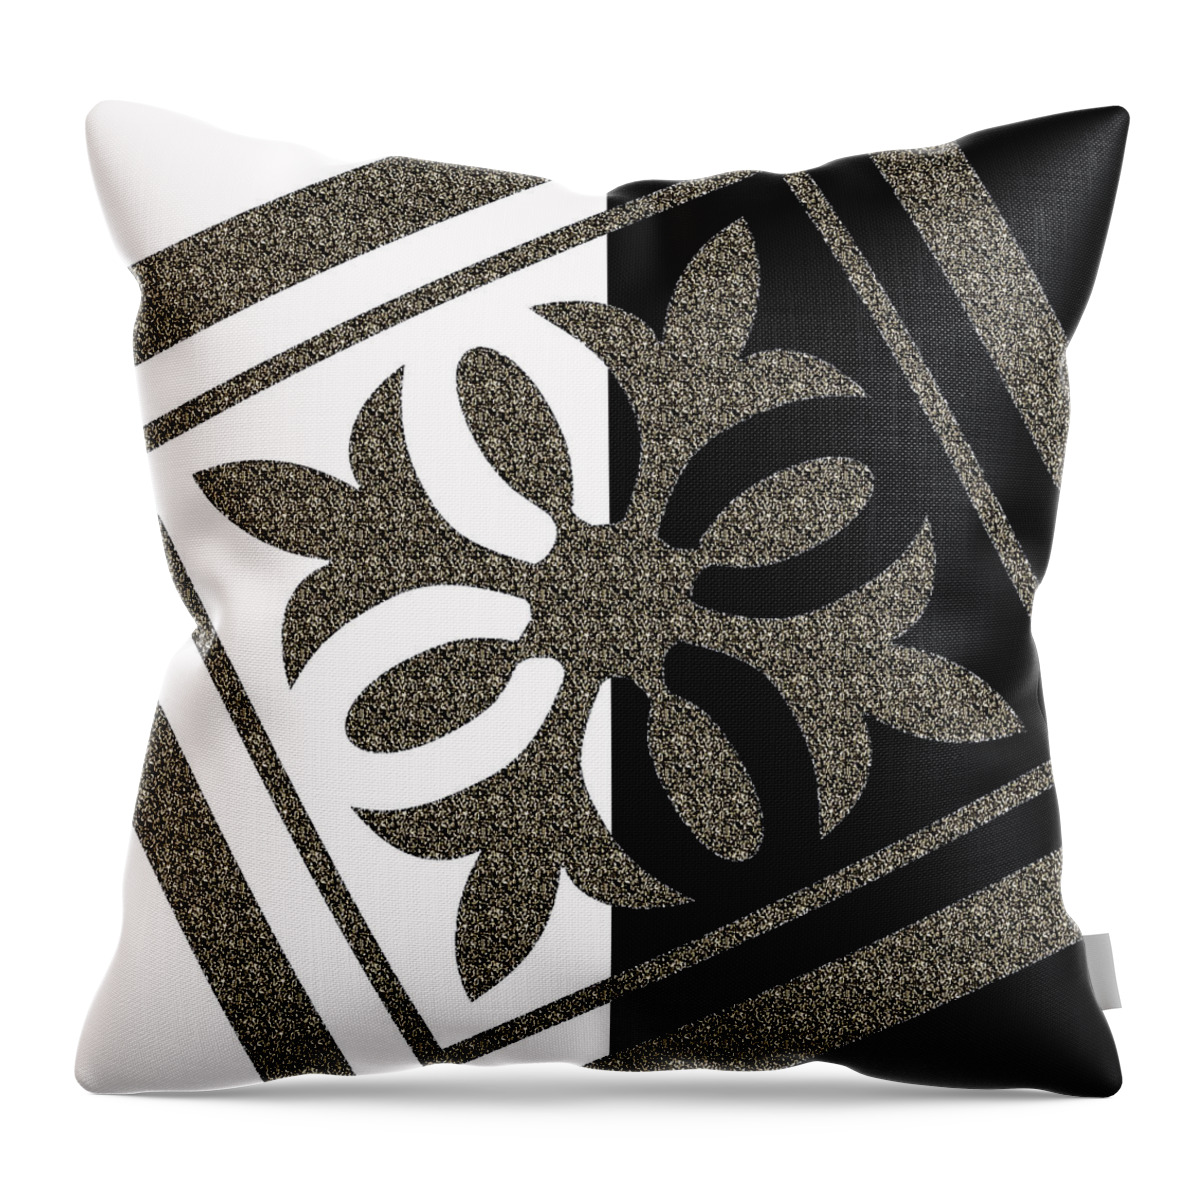 Abstract Digital Art Throw Pillow featuring the painting Looking For Balance by Georgeta Blanaru